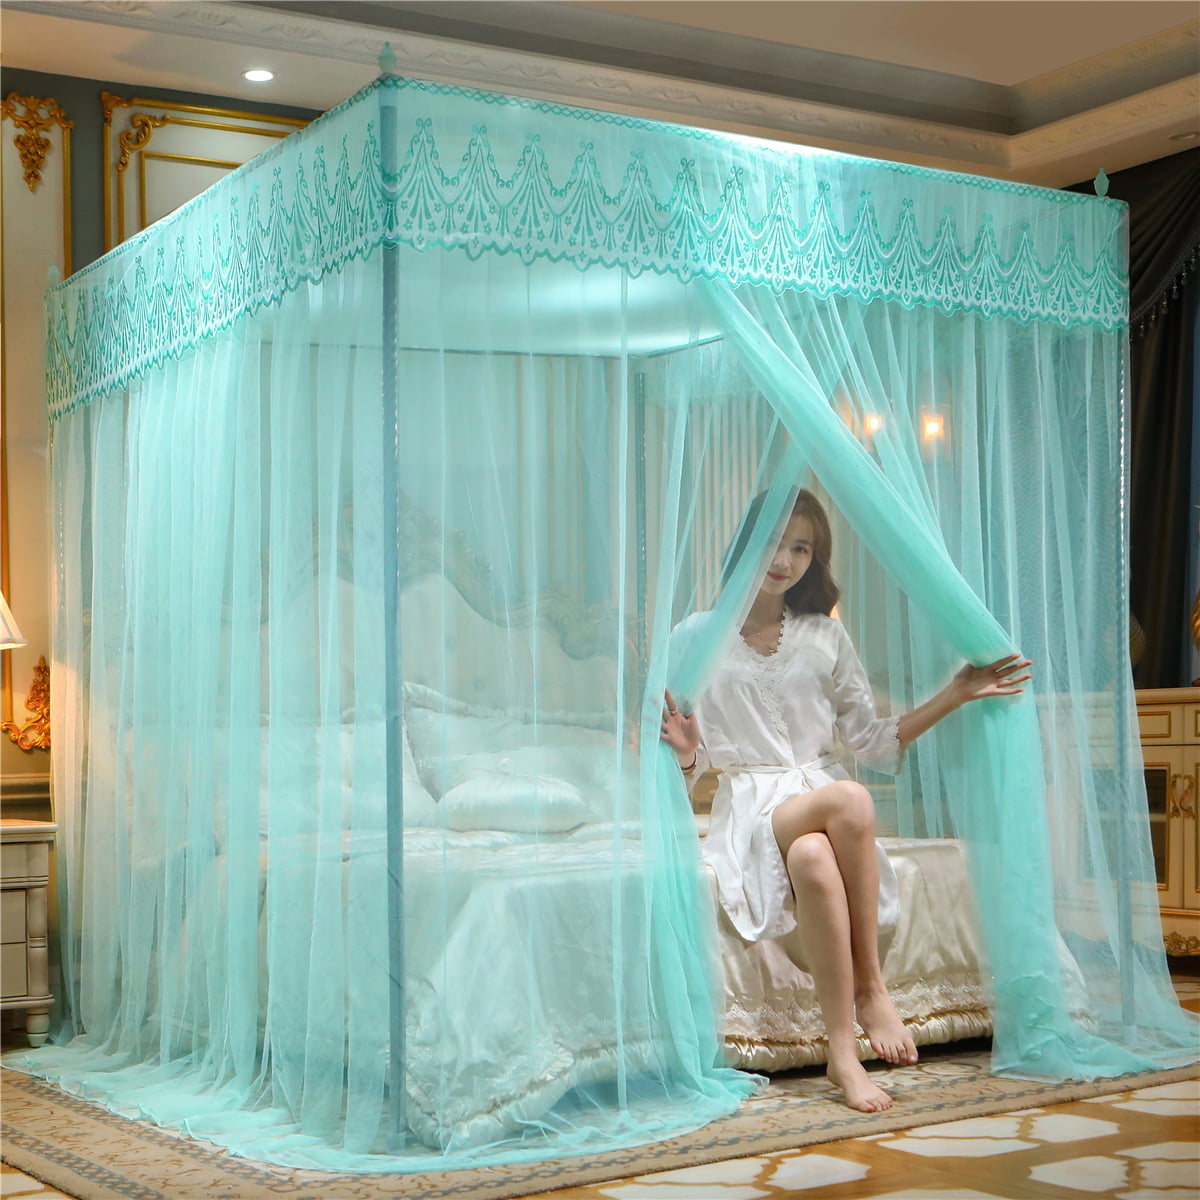 Dust Mosquito-proof Bed Curtain Canopy Mosquito Netting 4 Corner Post Bracket 